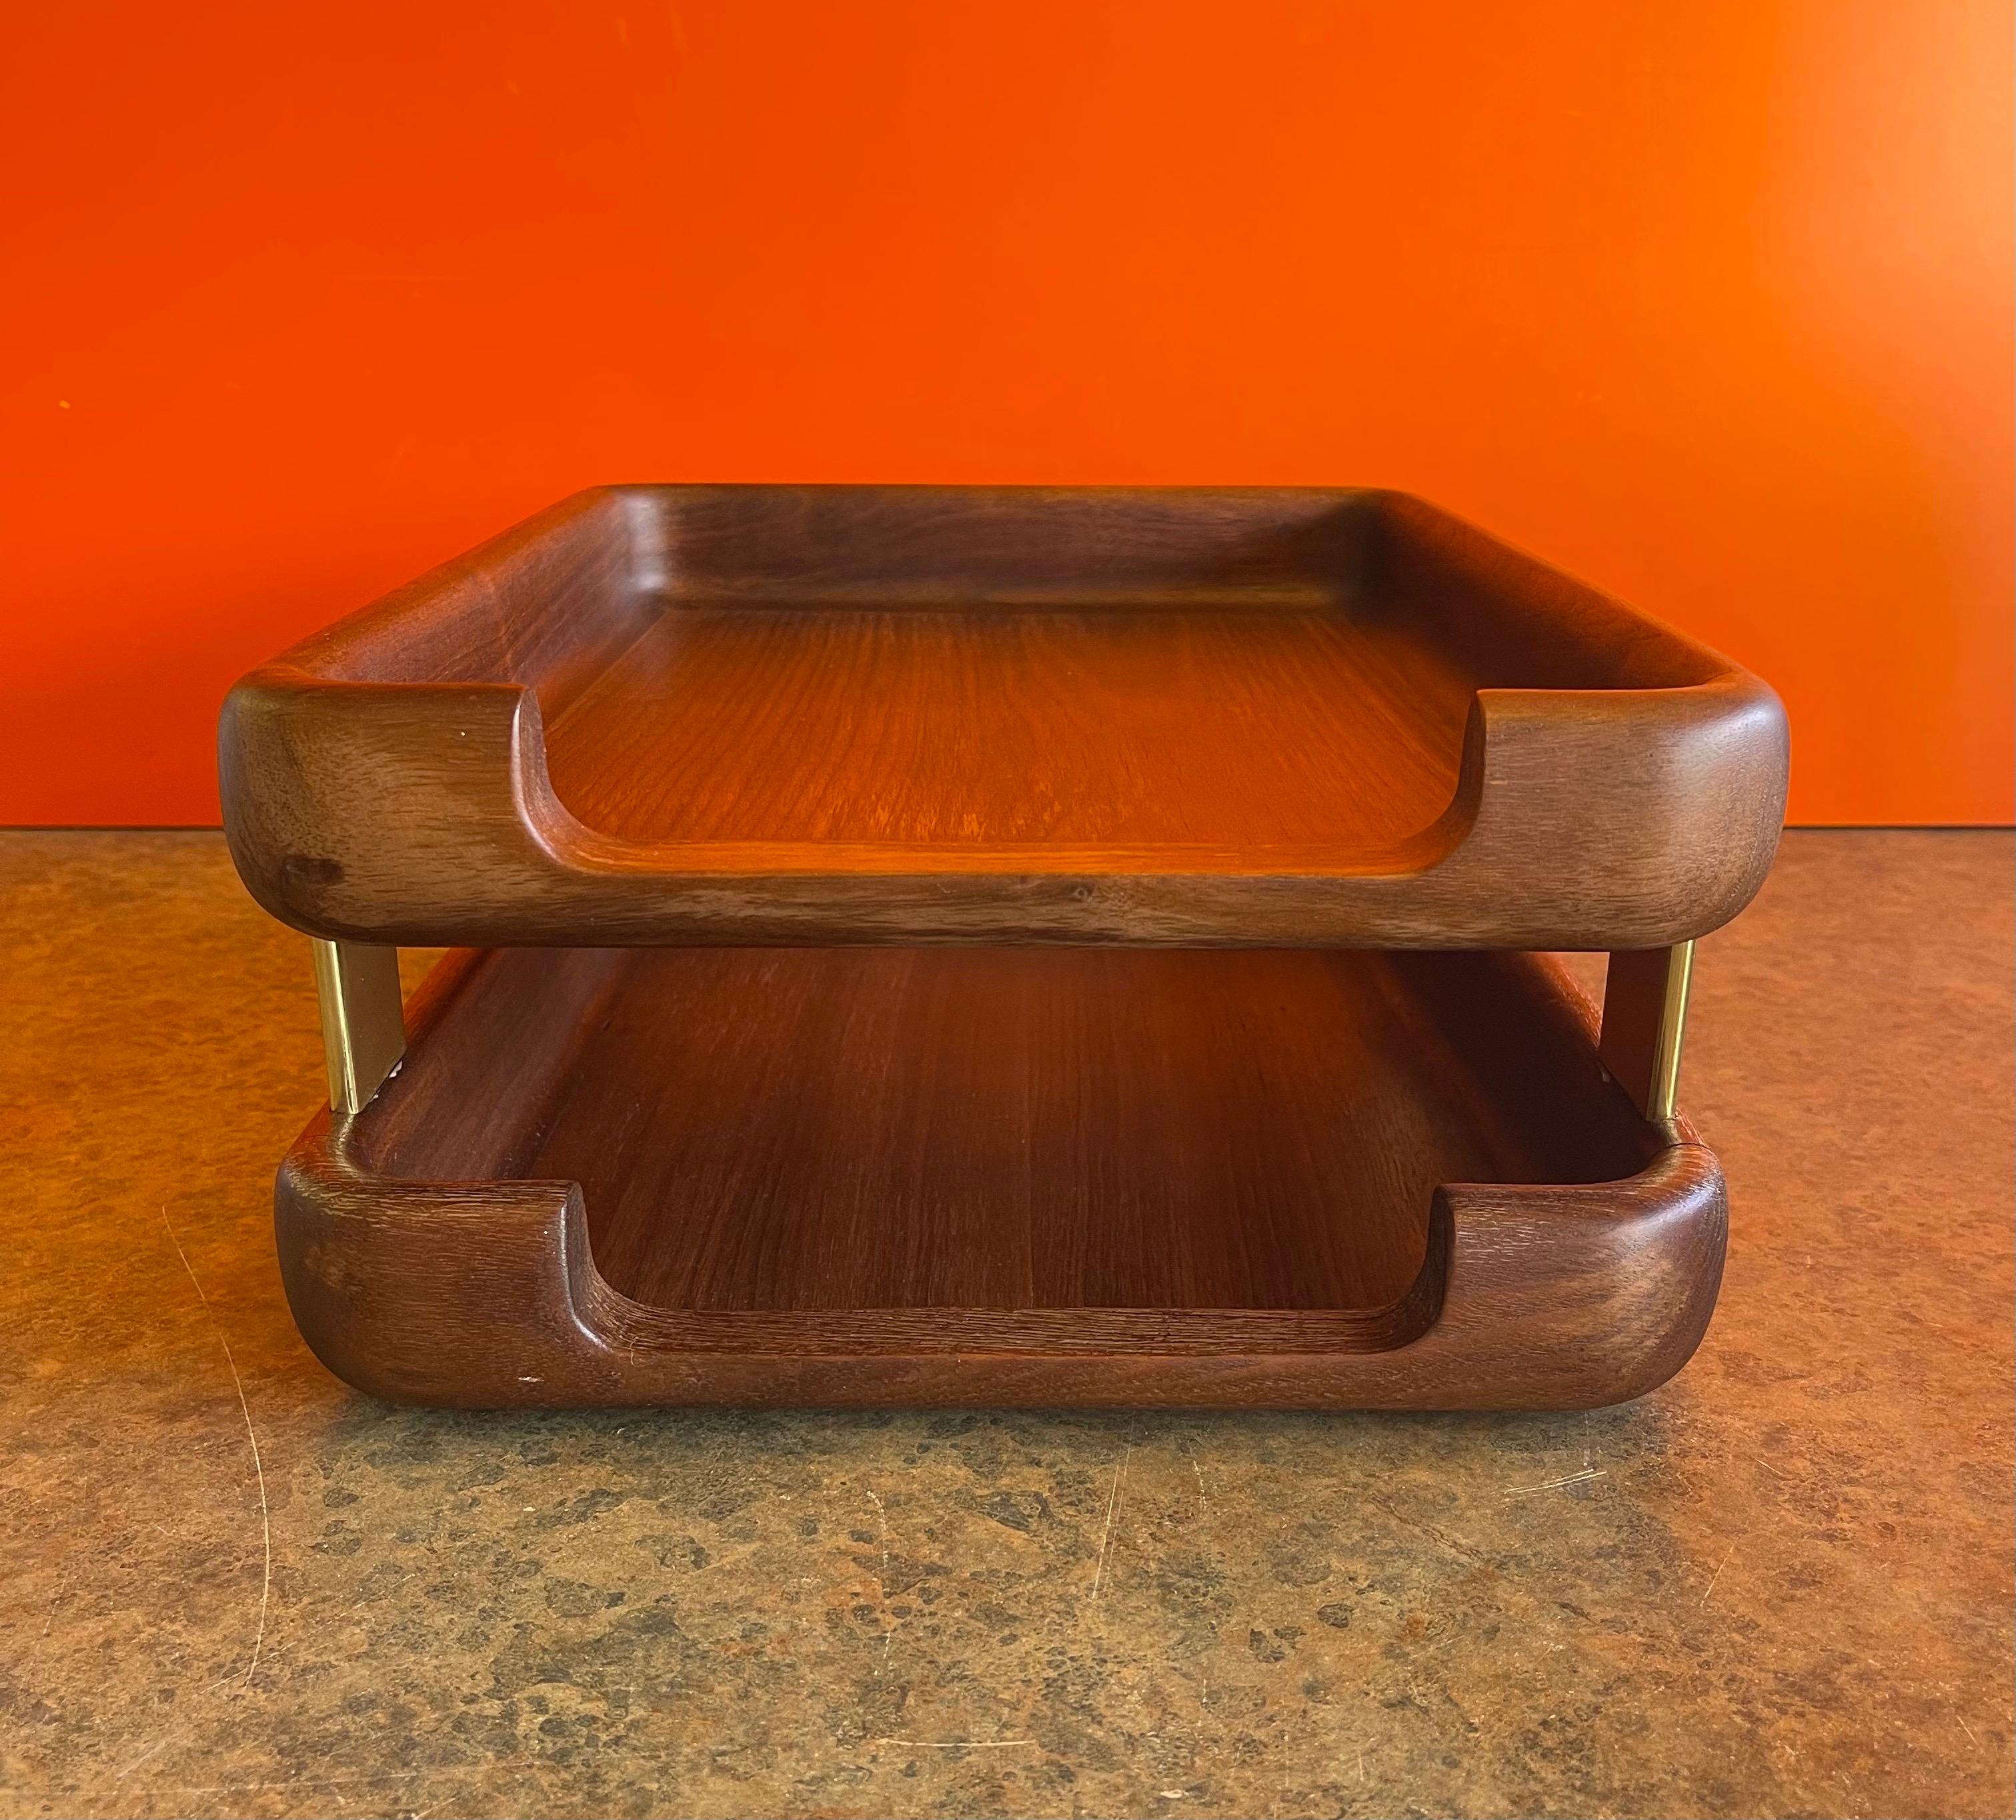 20th Century Woodline 6500 Double Letter Desk Tray in Walnut and Brass